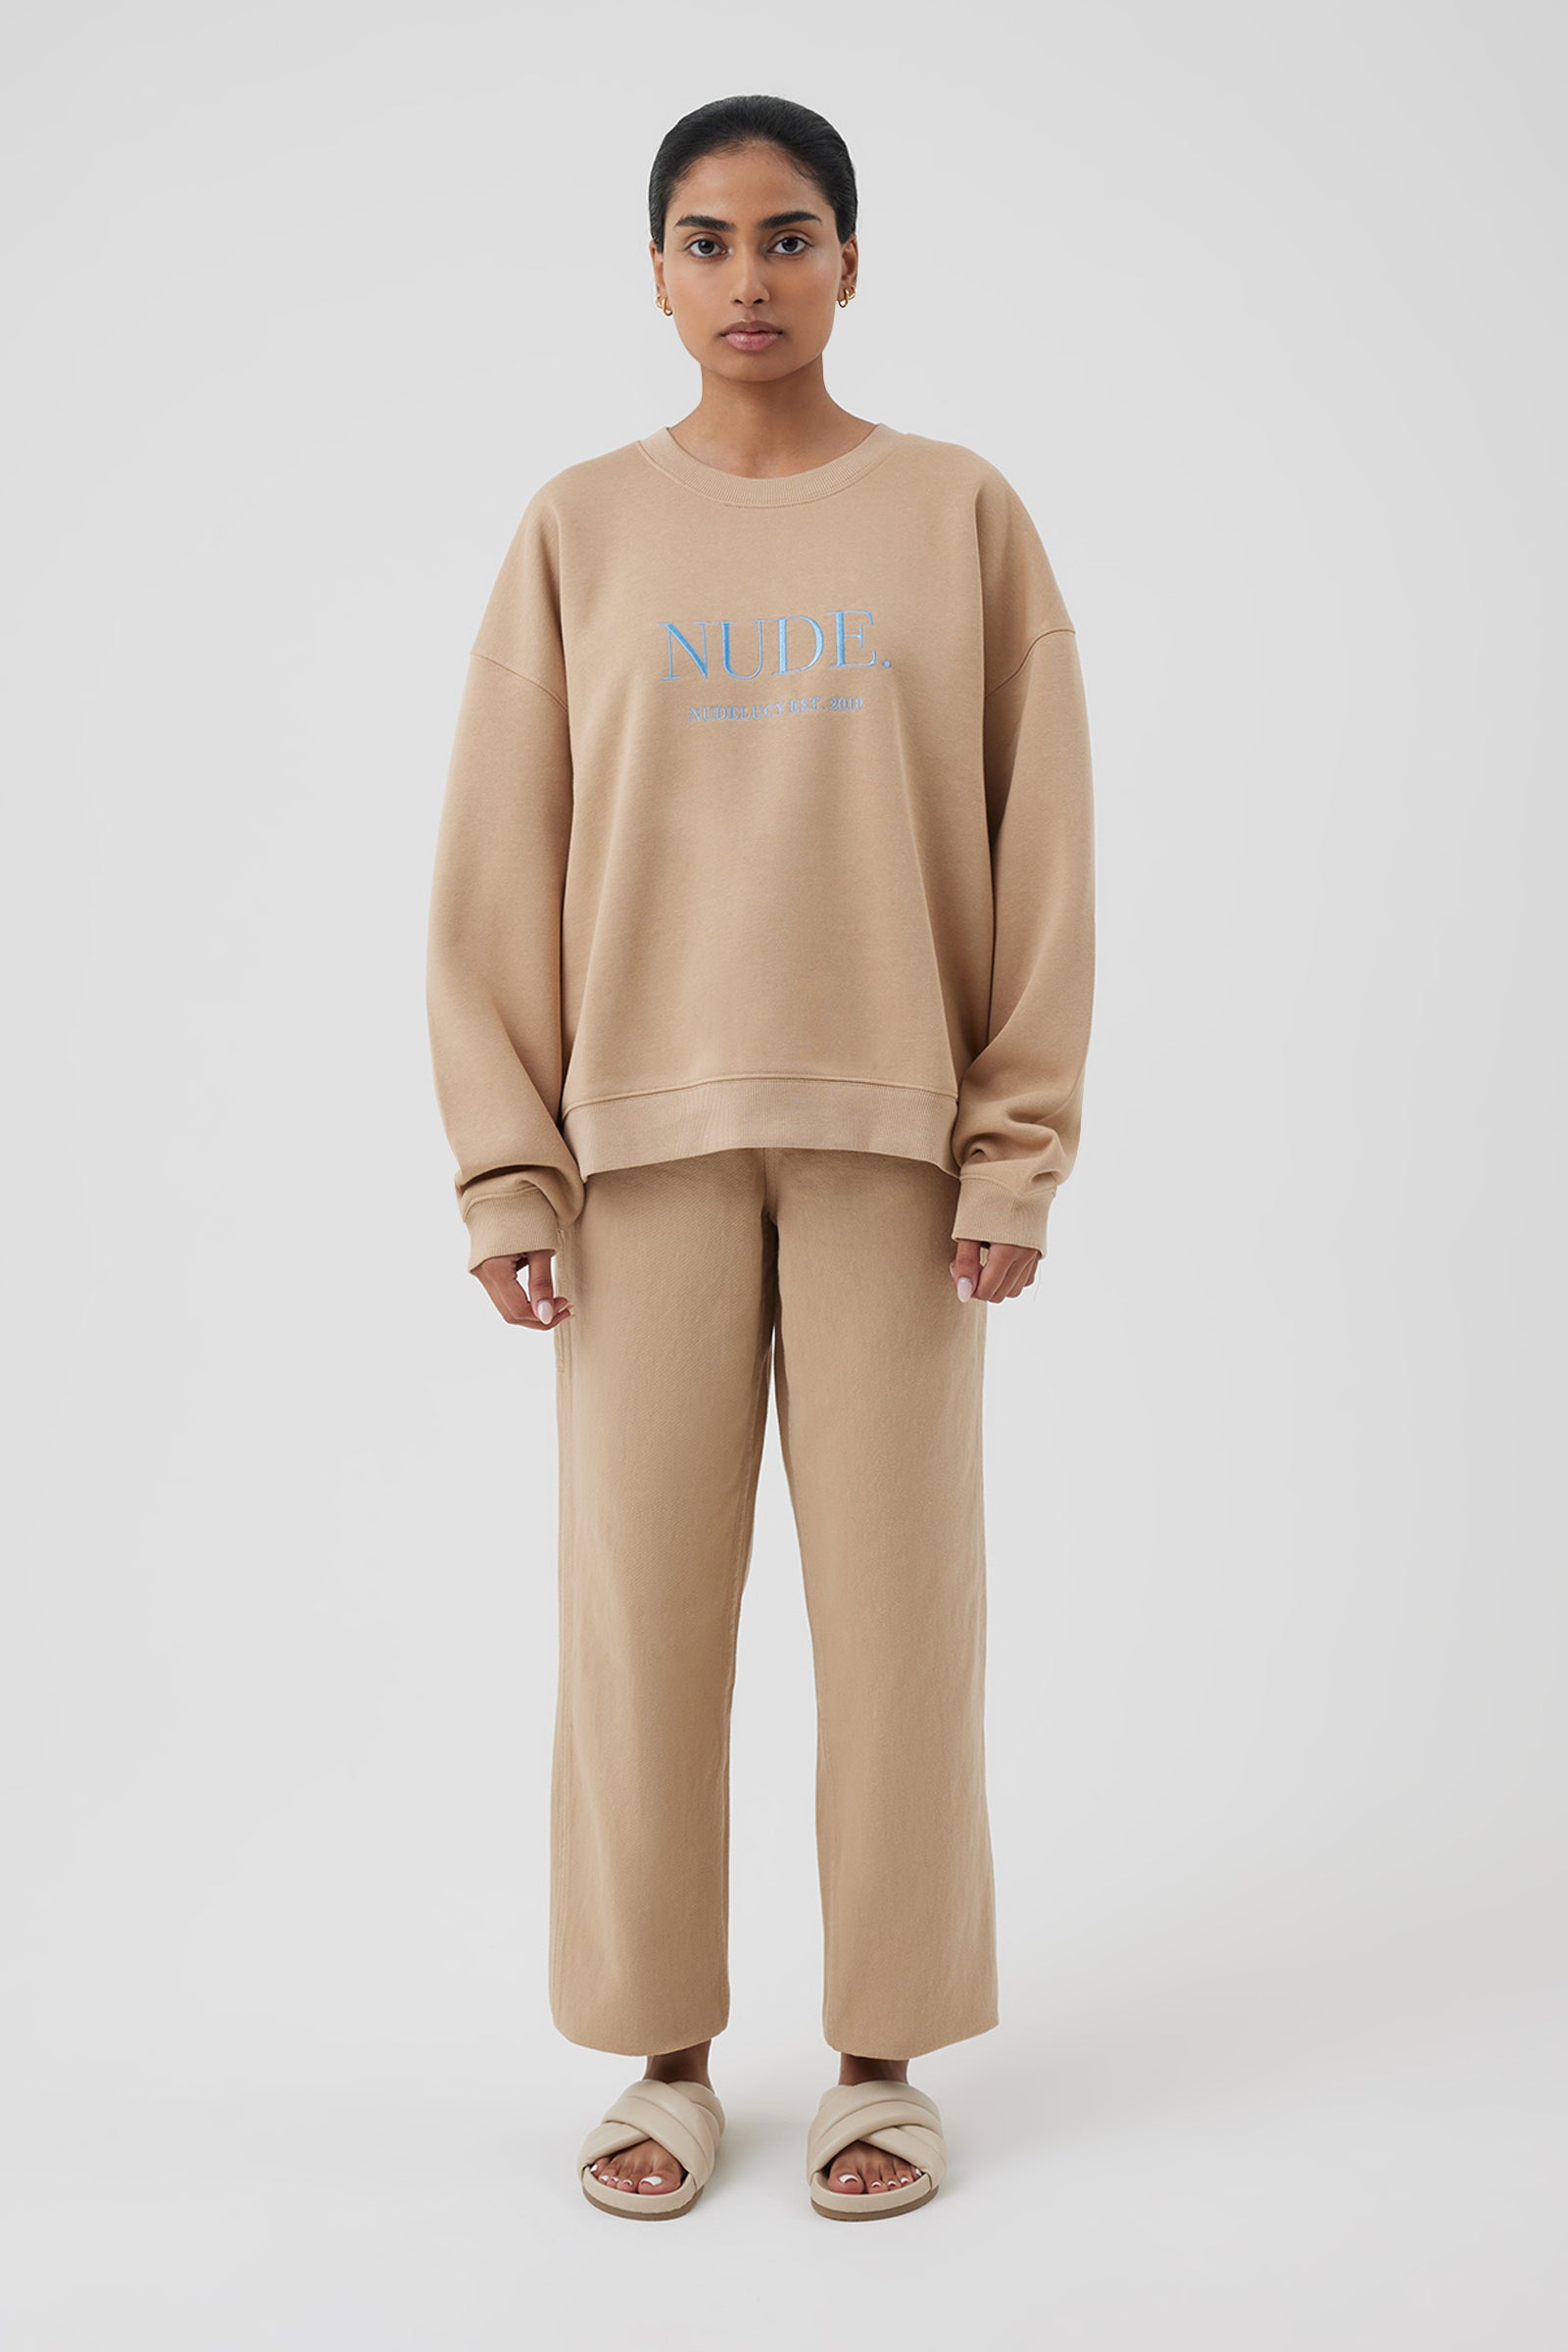 Nude Lucy Nude Sweat In A Light Brown Biscuit Colour 